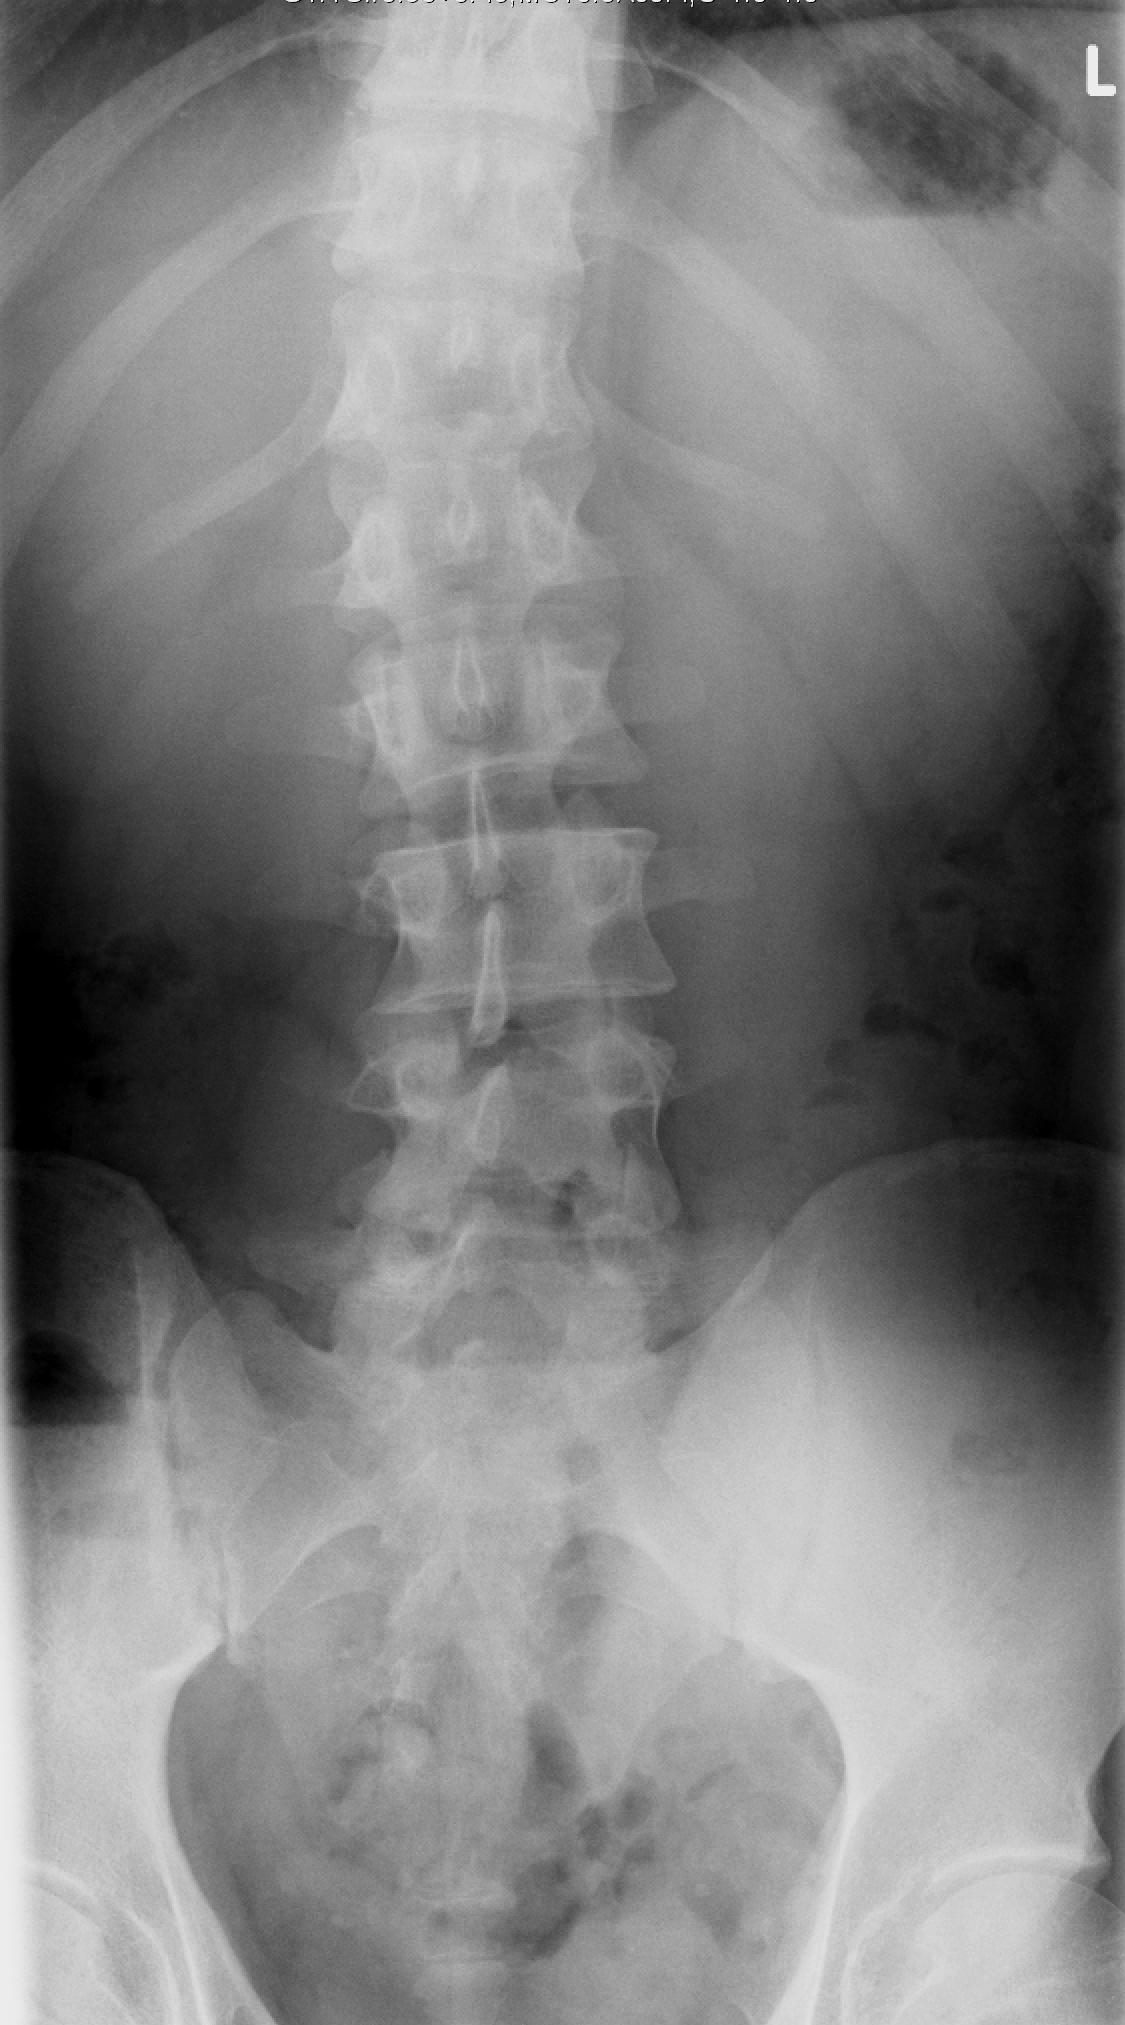 Mom Has a Spine Fracture: What are Her Options?